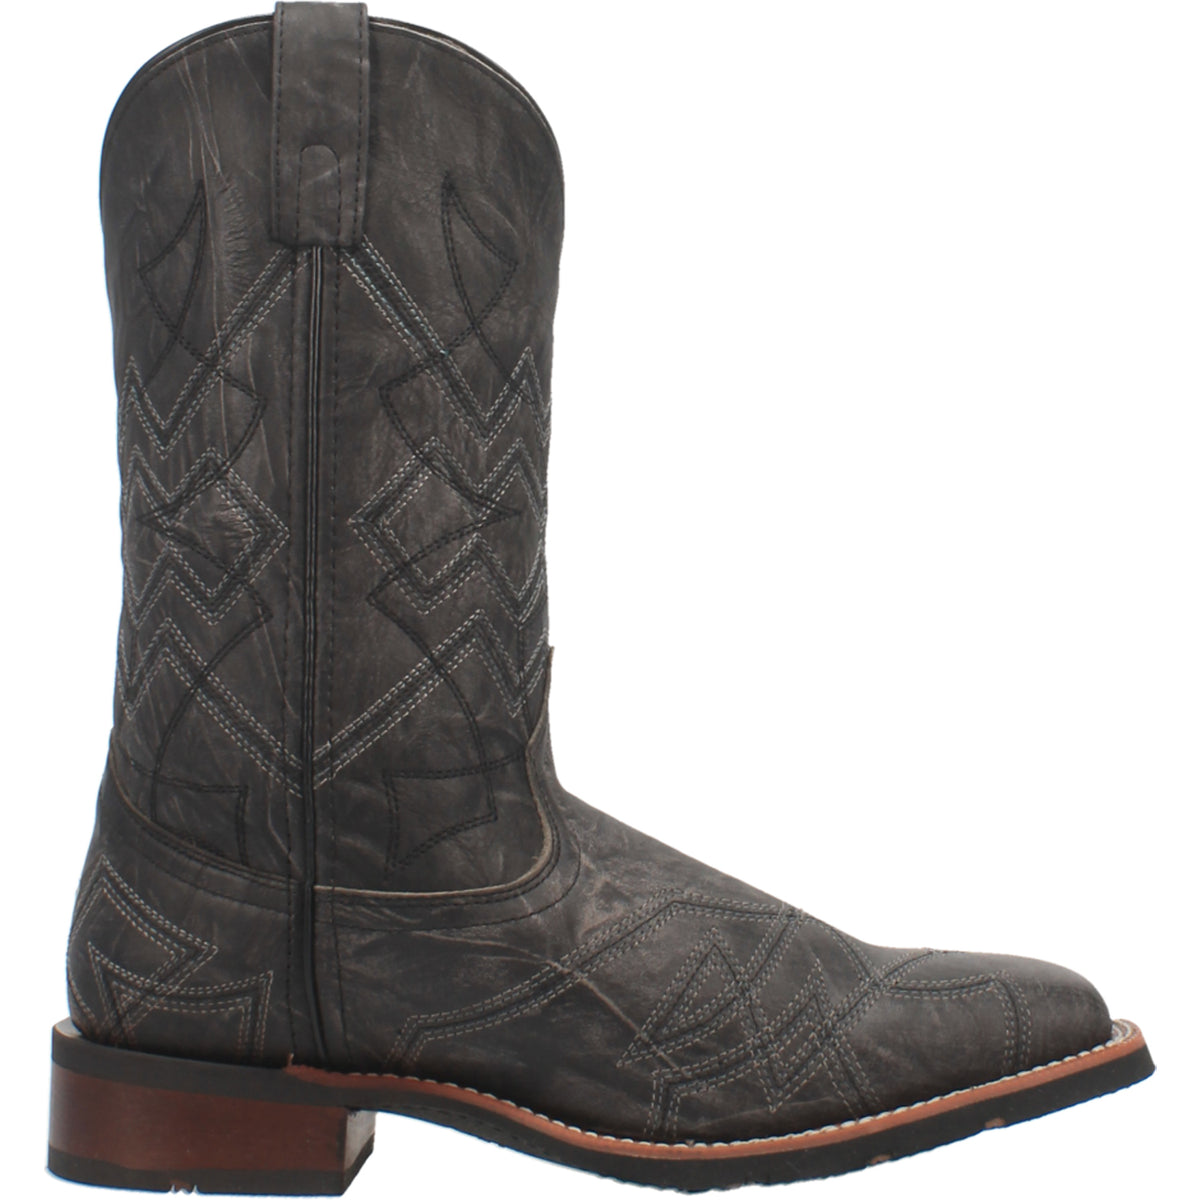 AXEL LEATHER BOOT Cover